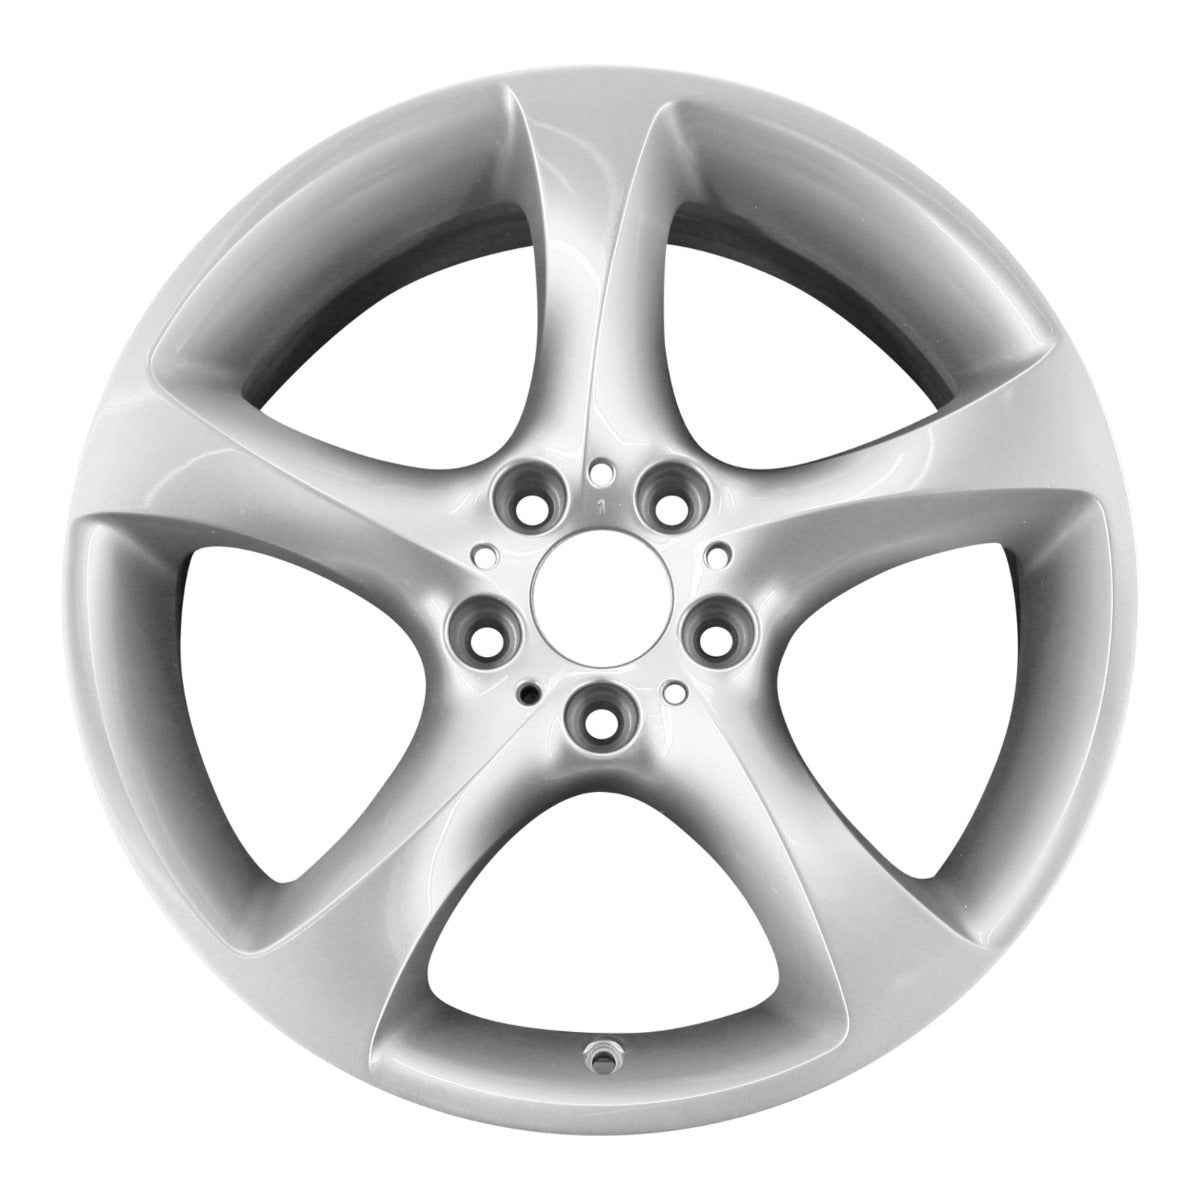 2011 BMW 328i New 19" Front Replacement Wheel Rim Style 230 RW59622S